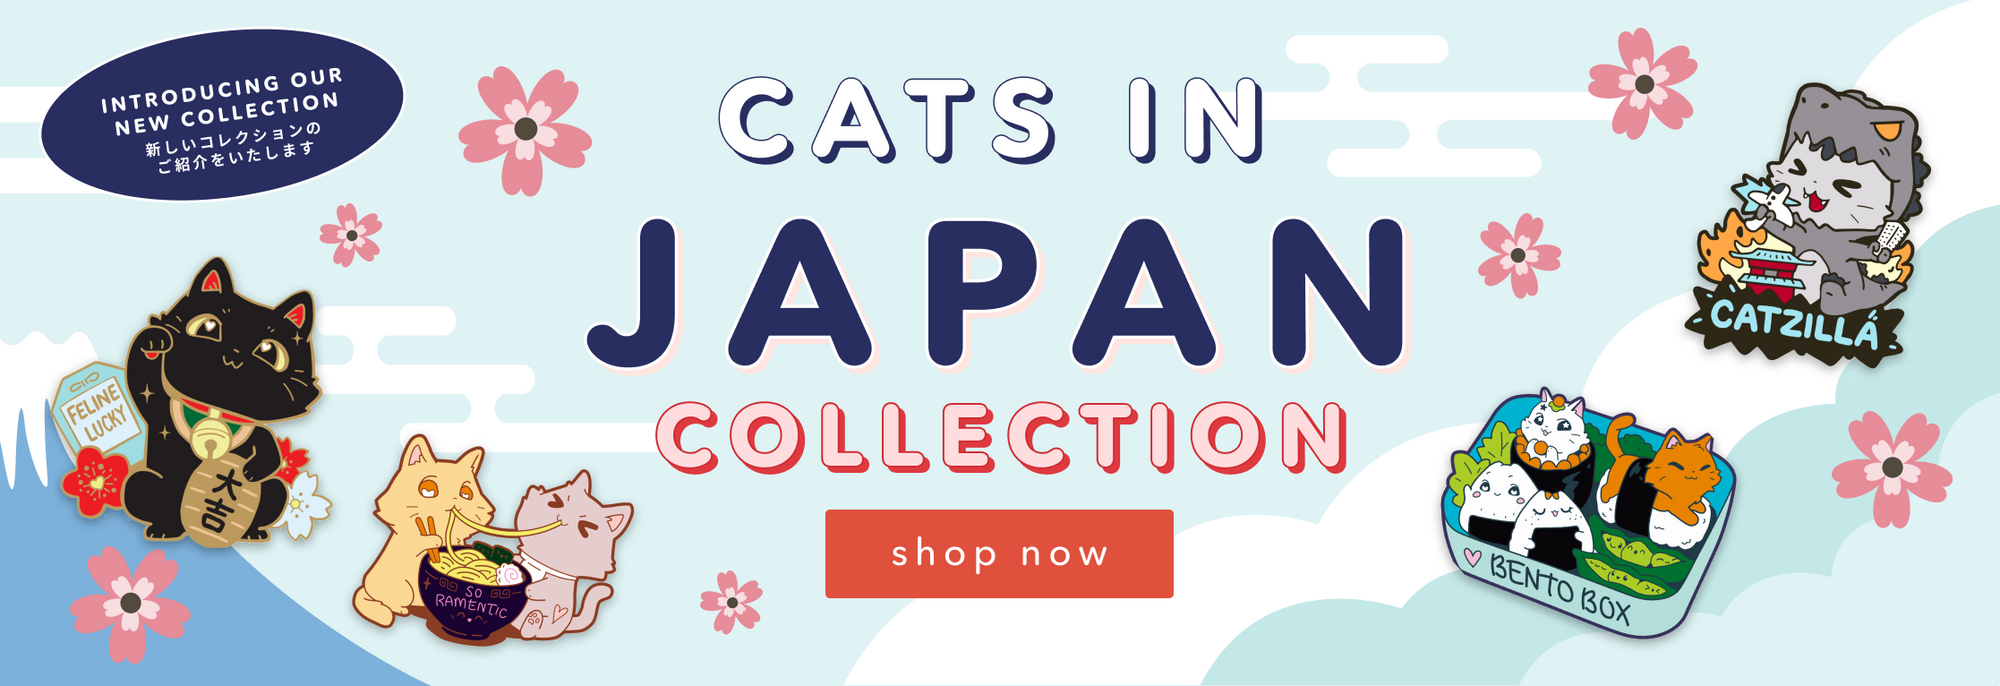 Introducing our new collection: Cats in Japan Collection. Shop Now